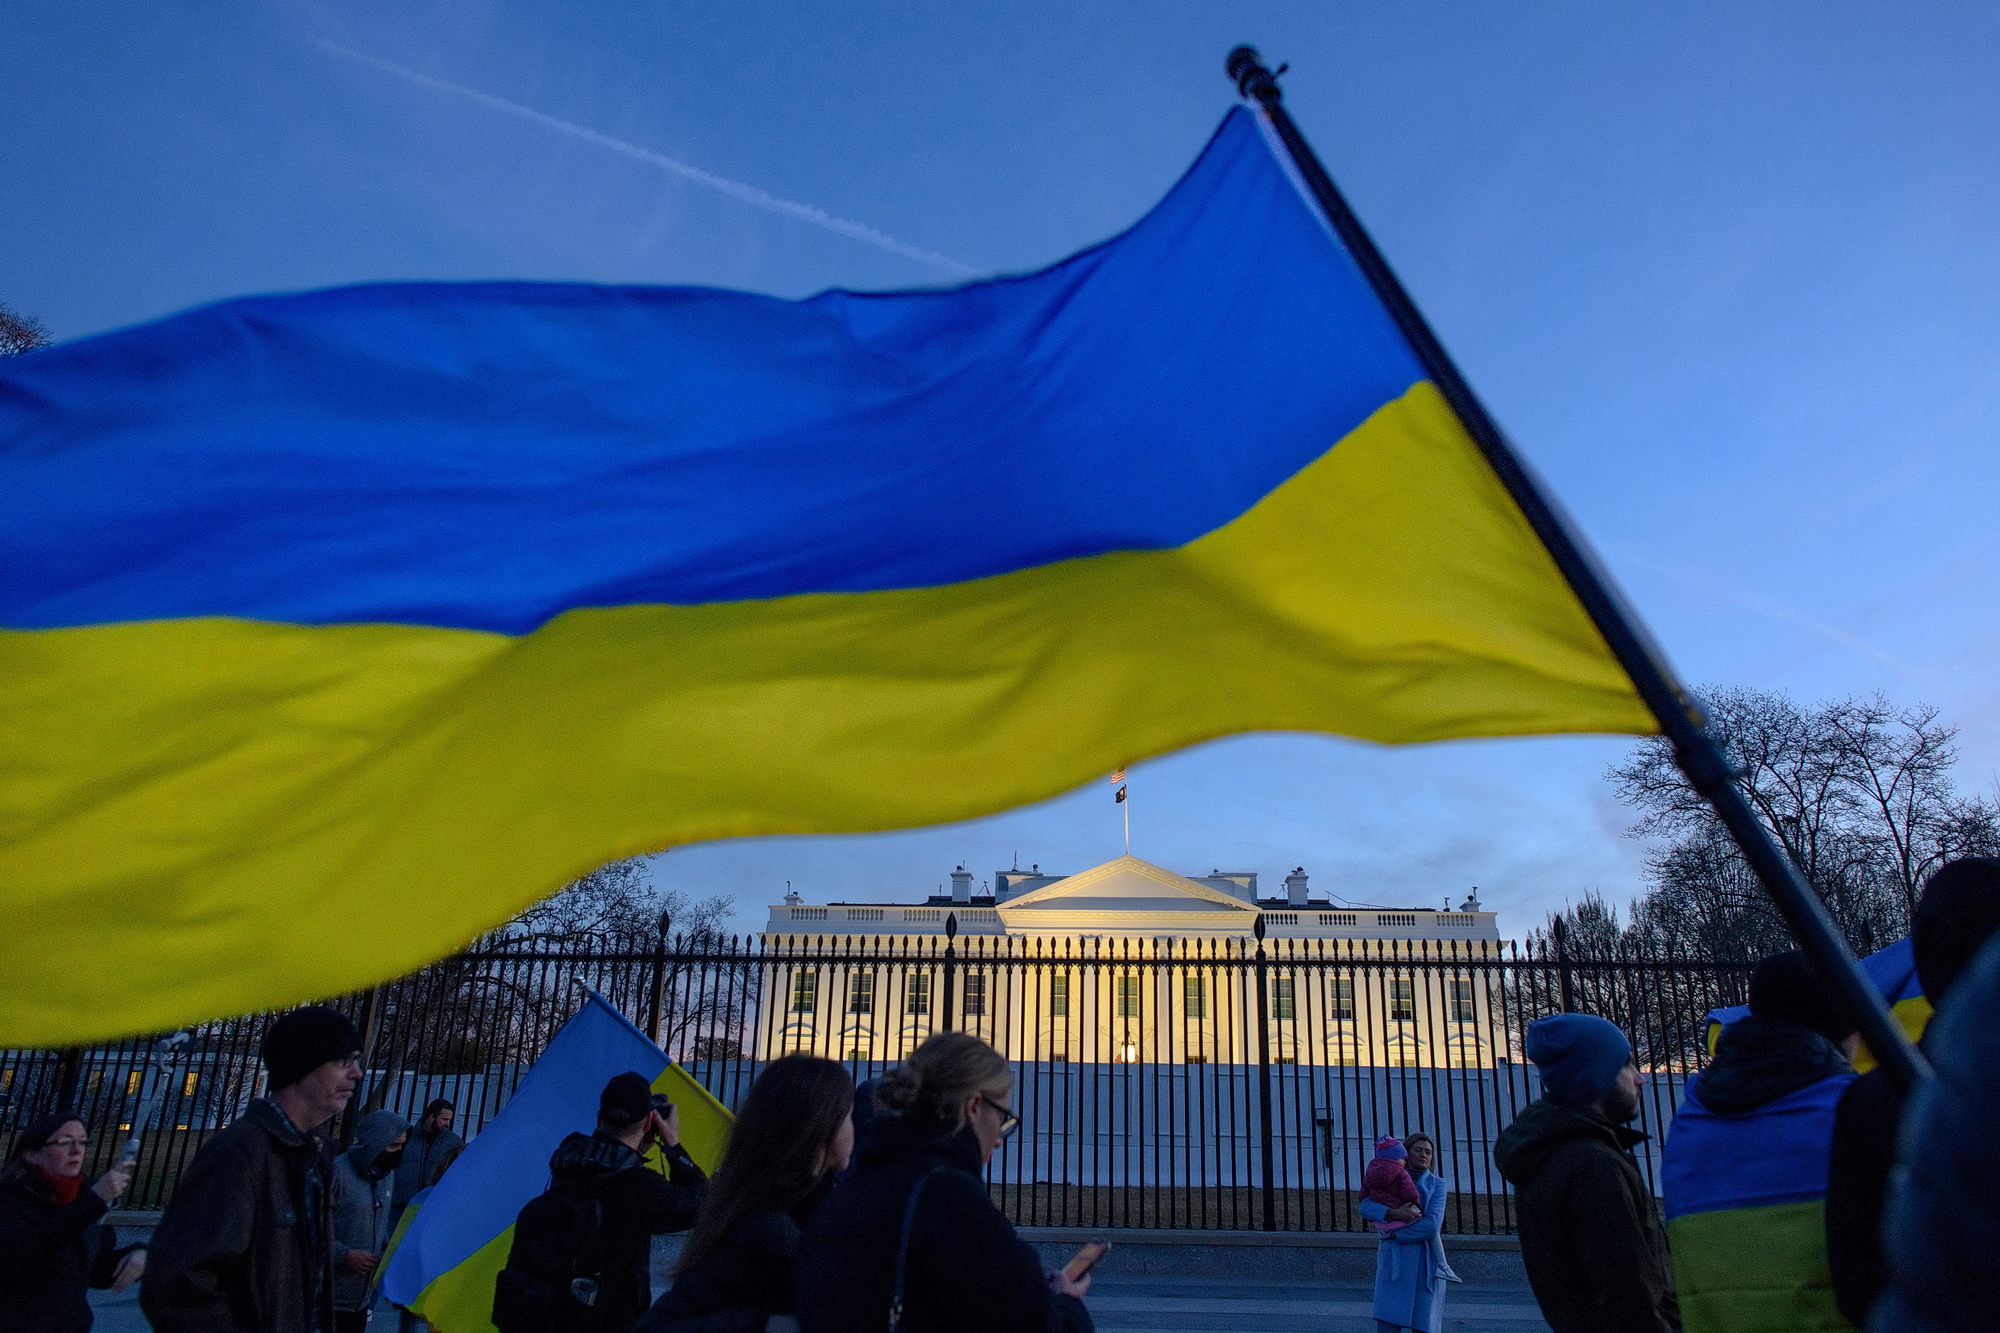 Victor Tregubov: Are you a foreigner who wants to help Ukraine? Here’s how